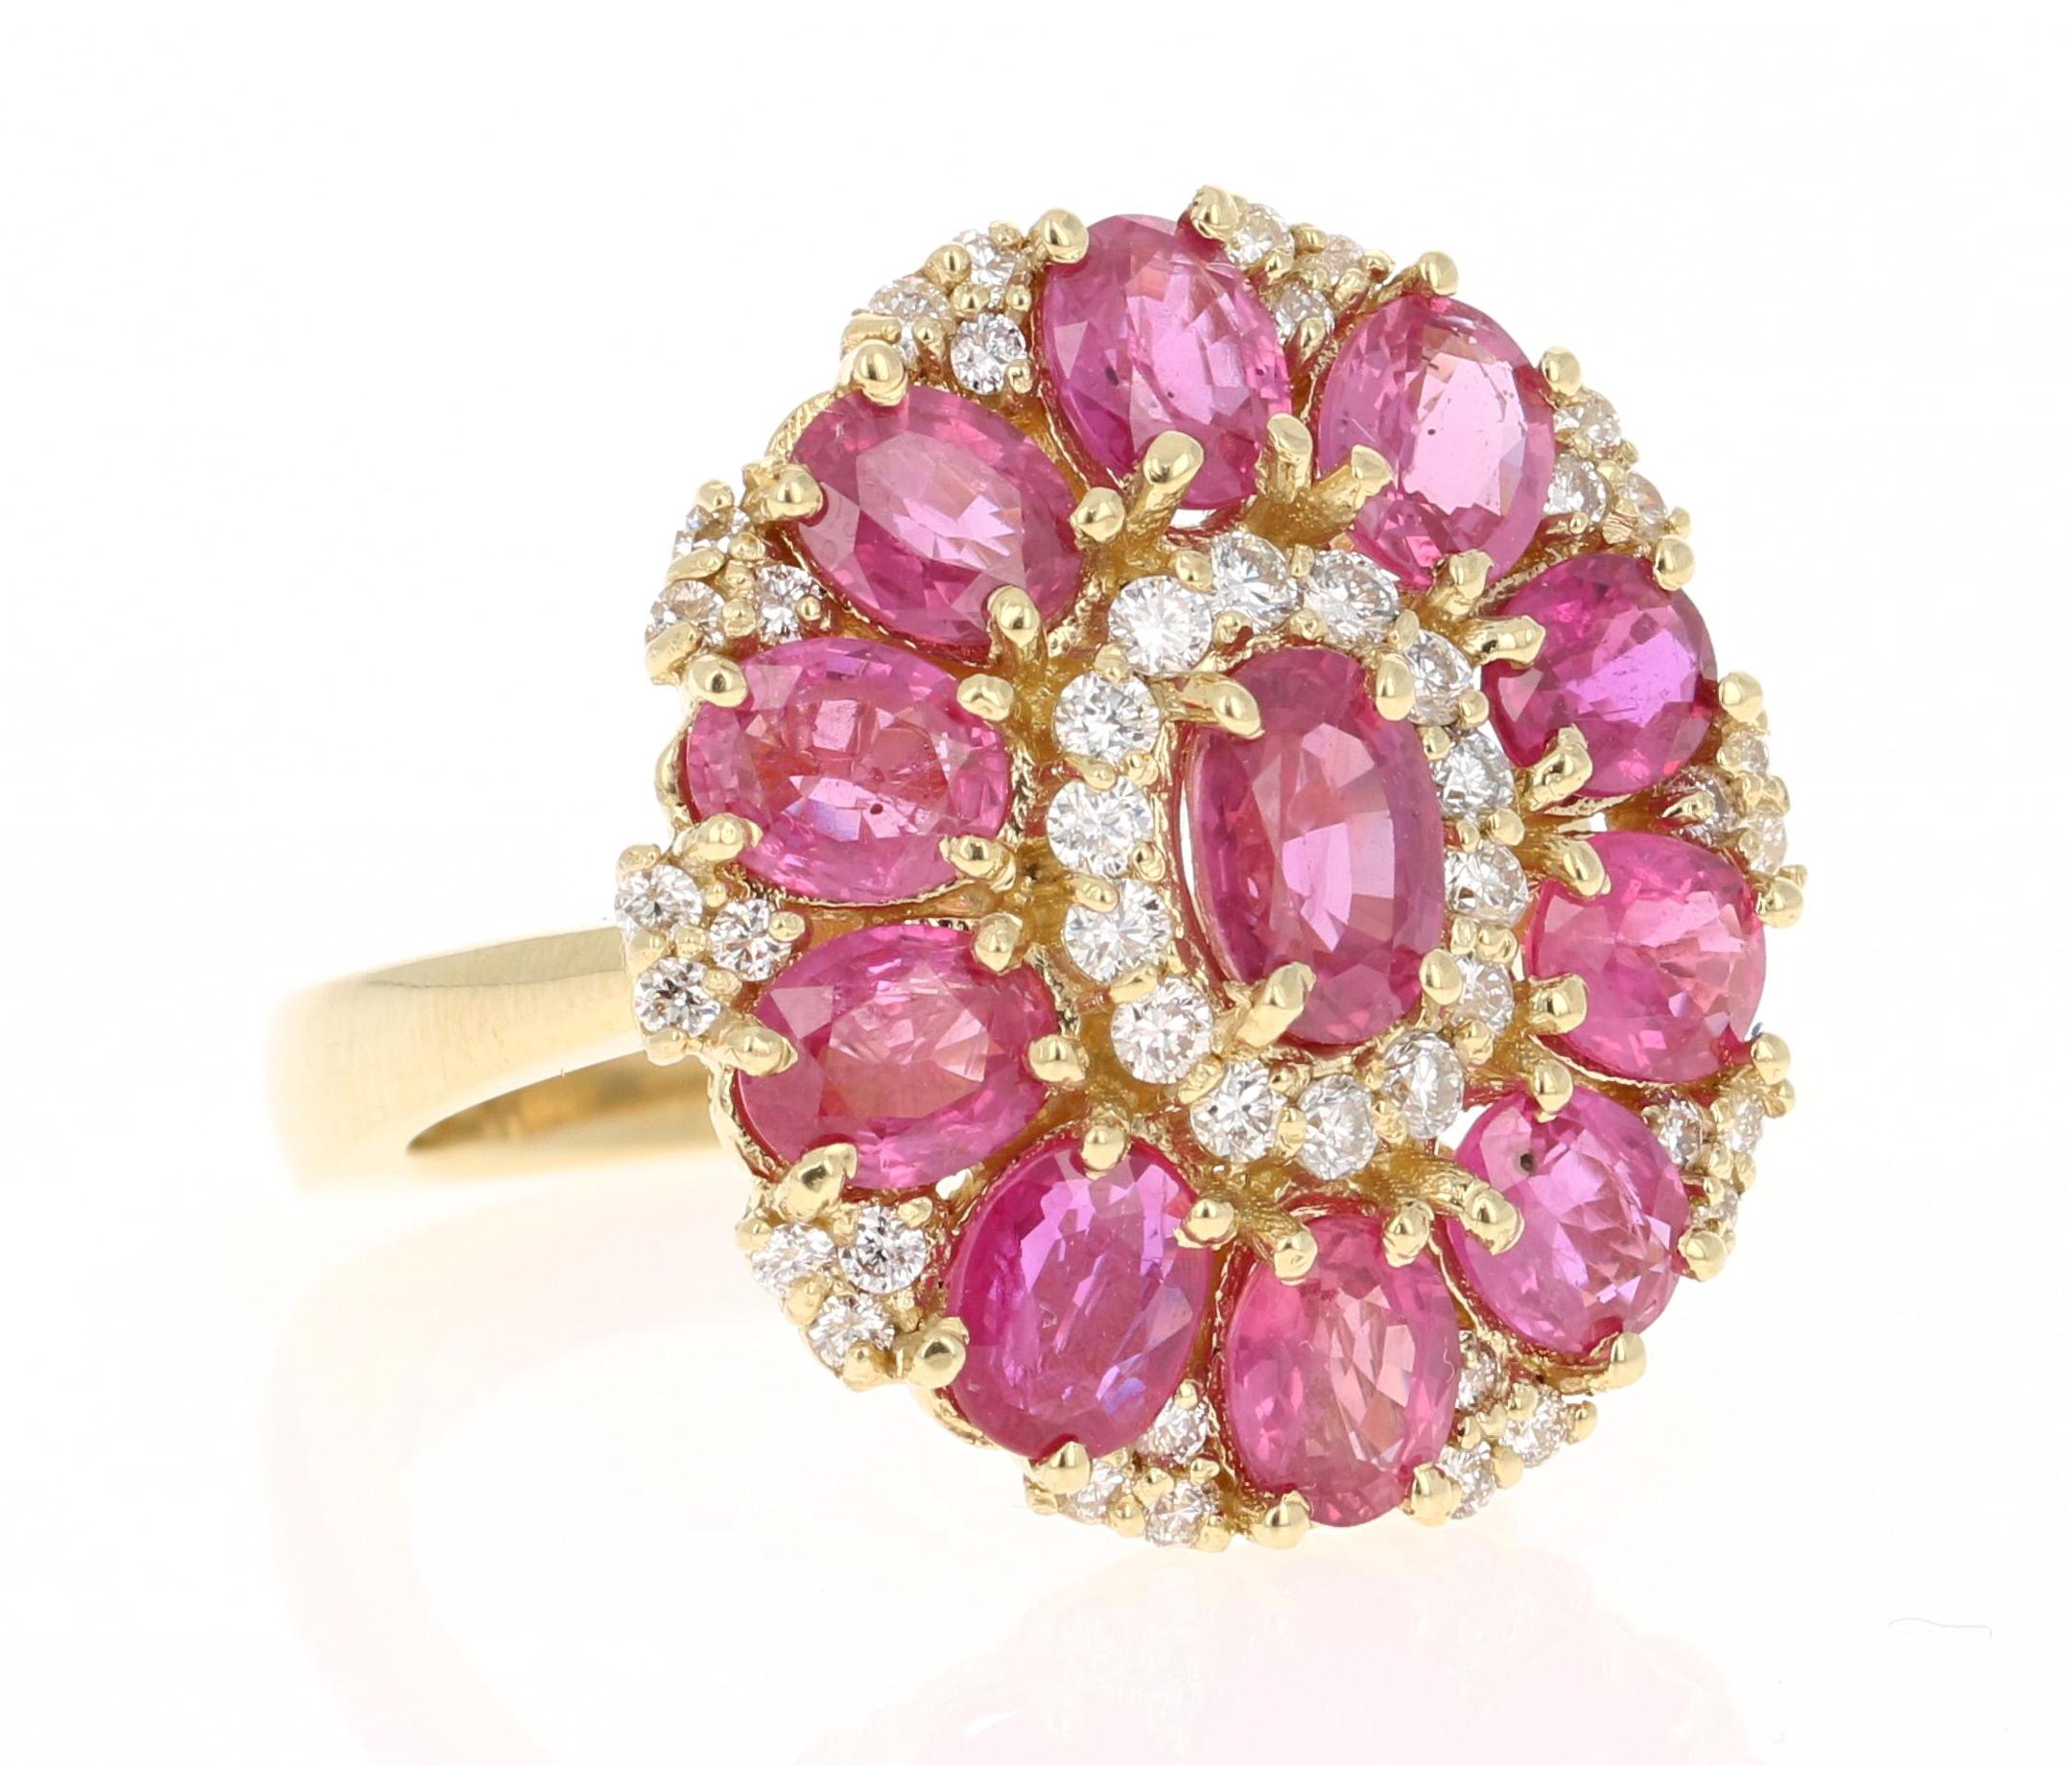 A real statement piece - 5.29 Carat Ruby and Diamond Cocktail Ring in 18K Yellow Gold!

This ring has gorgeous Burmese Rubies that weigh a total of 4.75 Carats Carat Pear Cut Ruby and is surrounded by 44 Round Cut Rubies that weigh 0.54 Carats. The